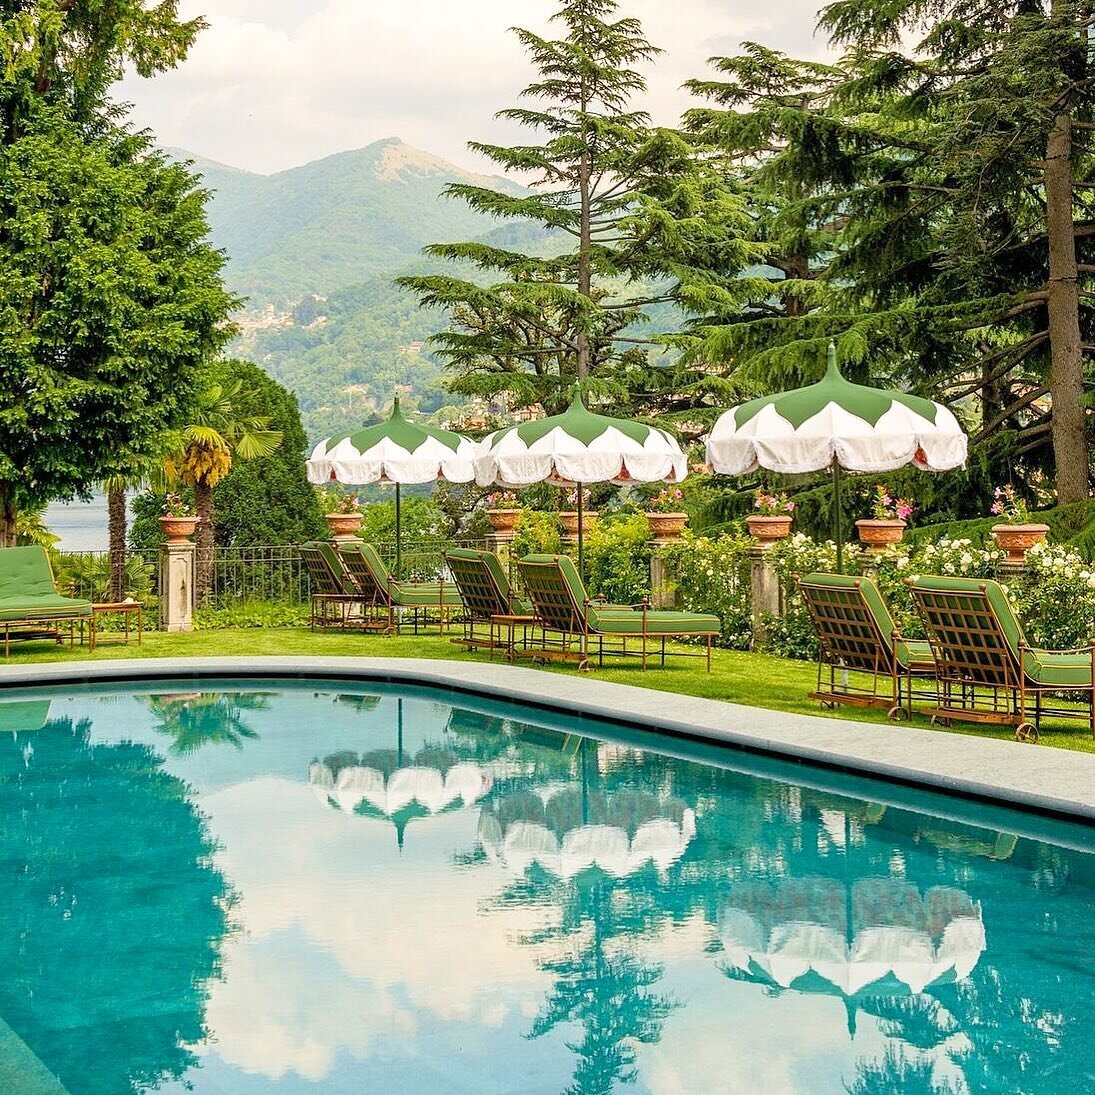 So excited for my clients heading to the stunning @passalacqualakecomo this weekend ✨